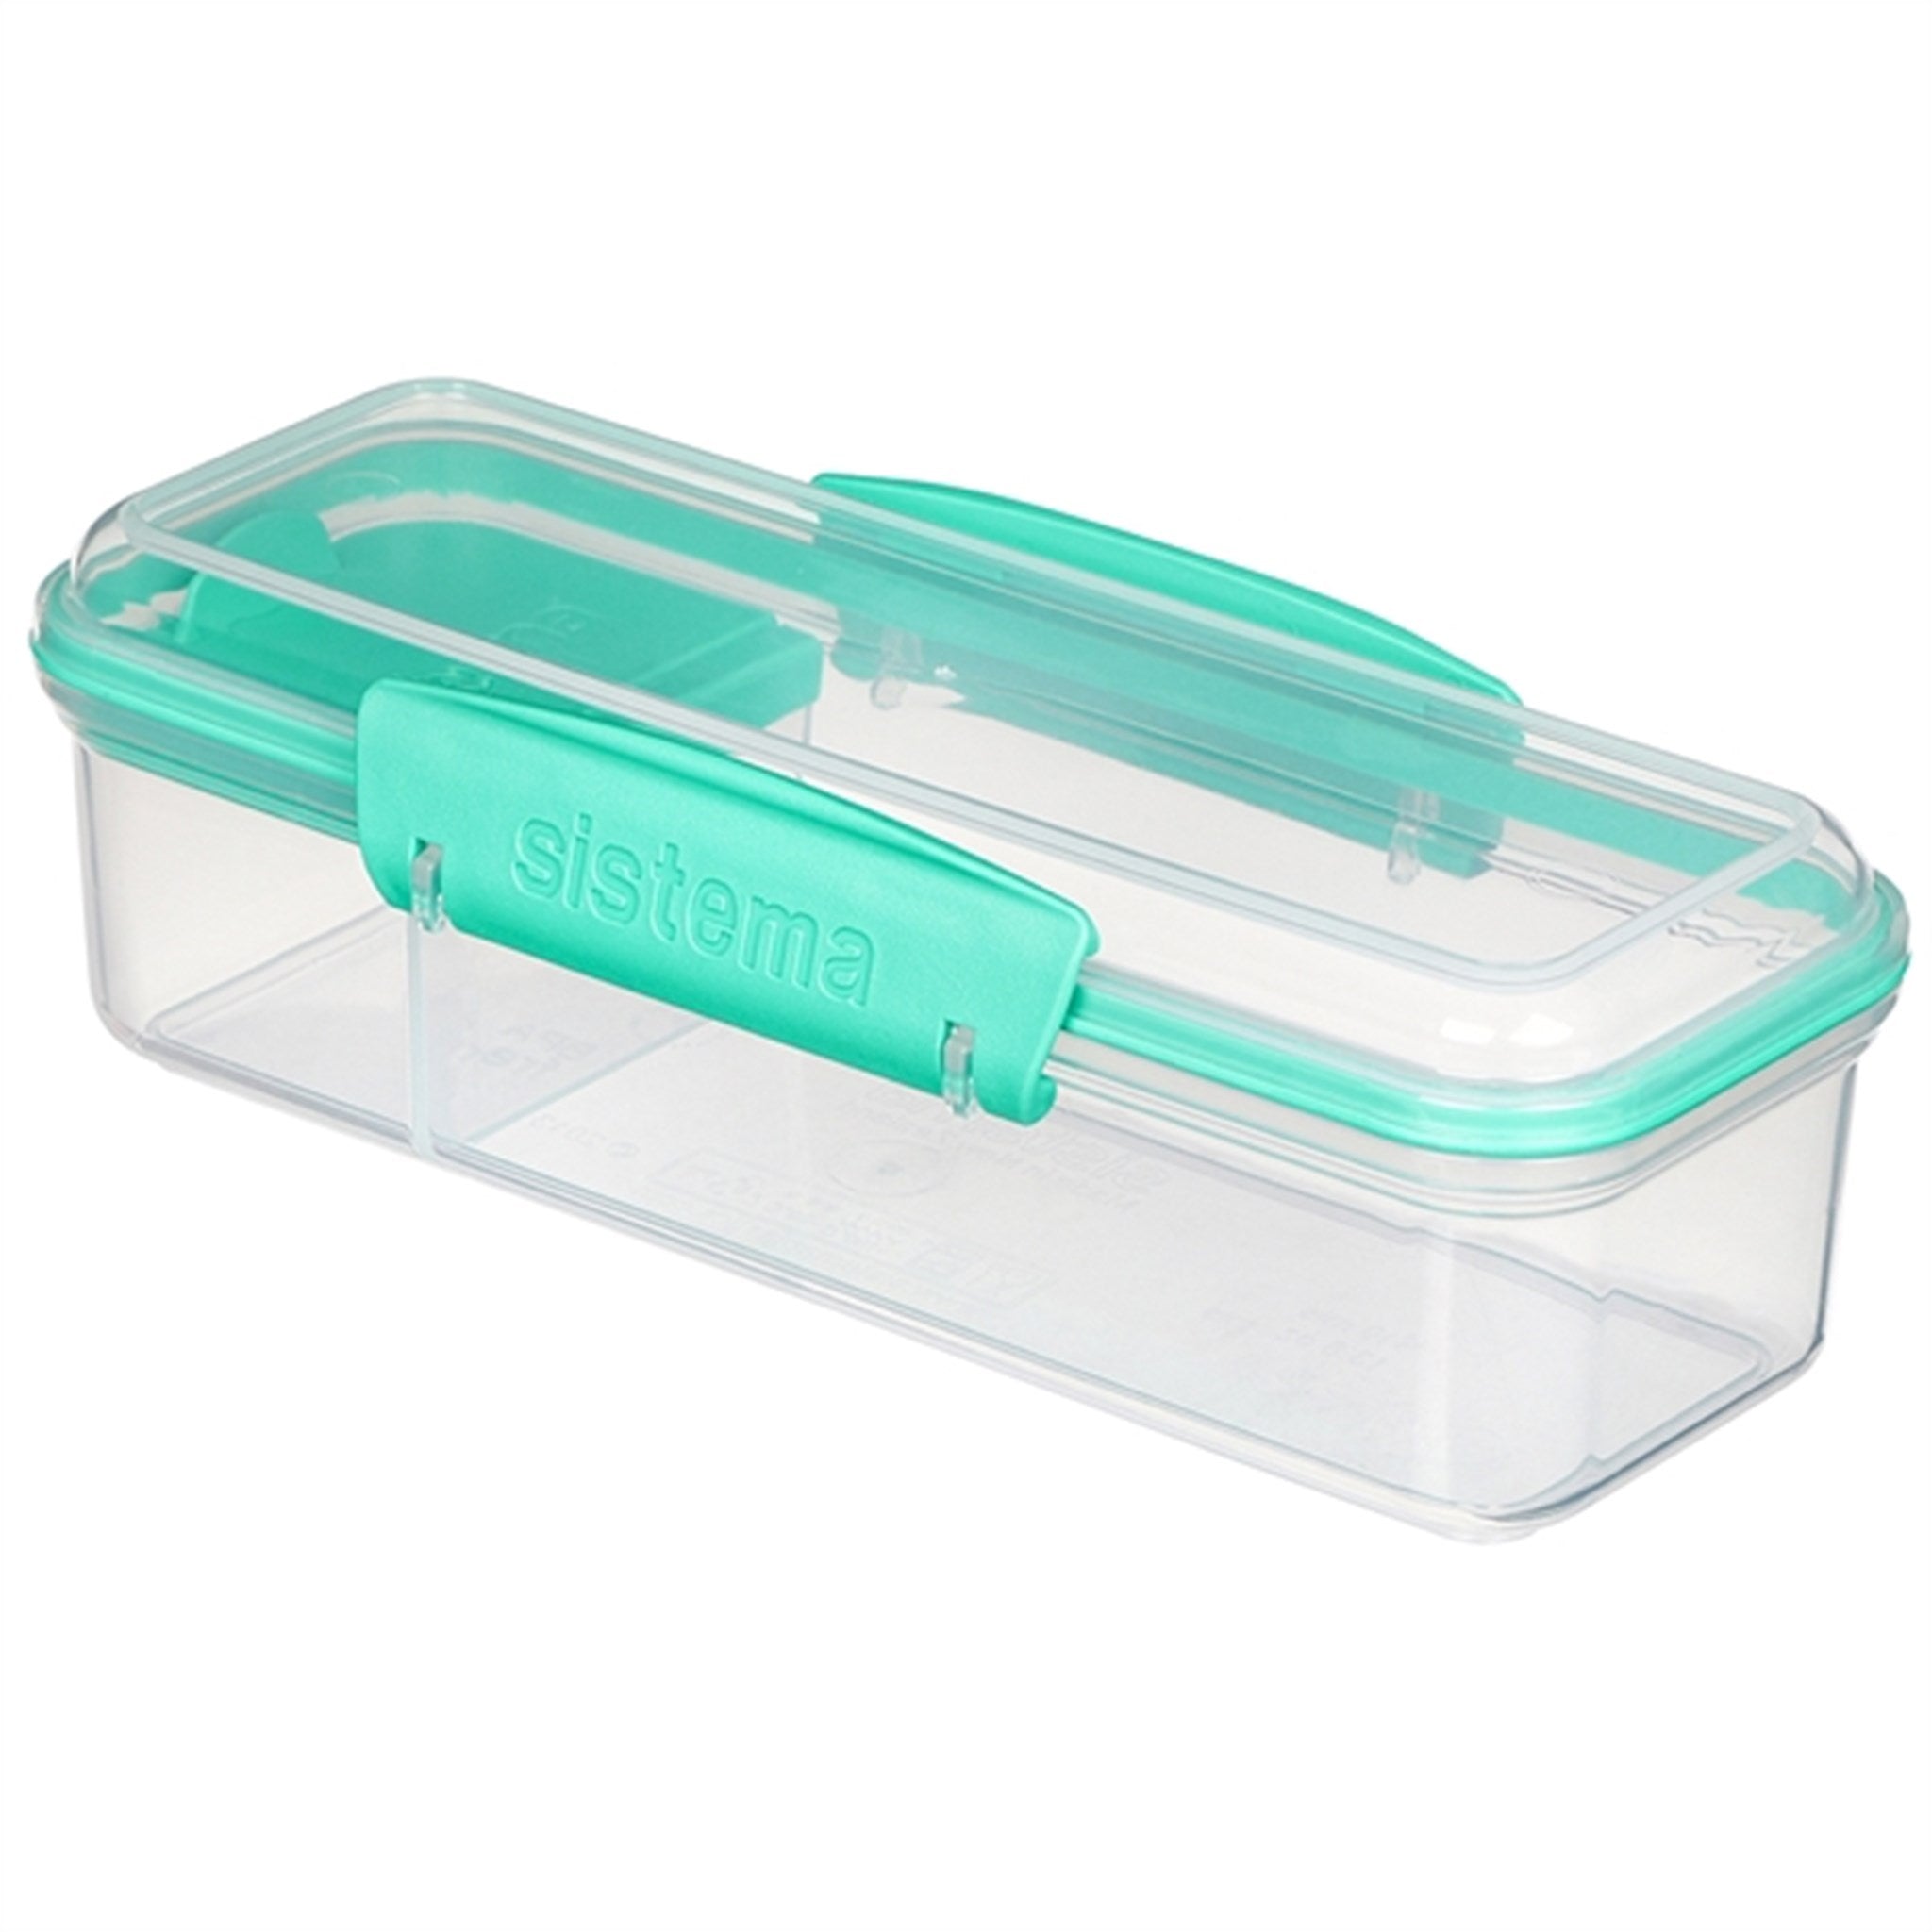 Sistema To Go Snack Attack Lunch Box 410 ml Minty Teal